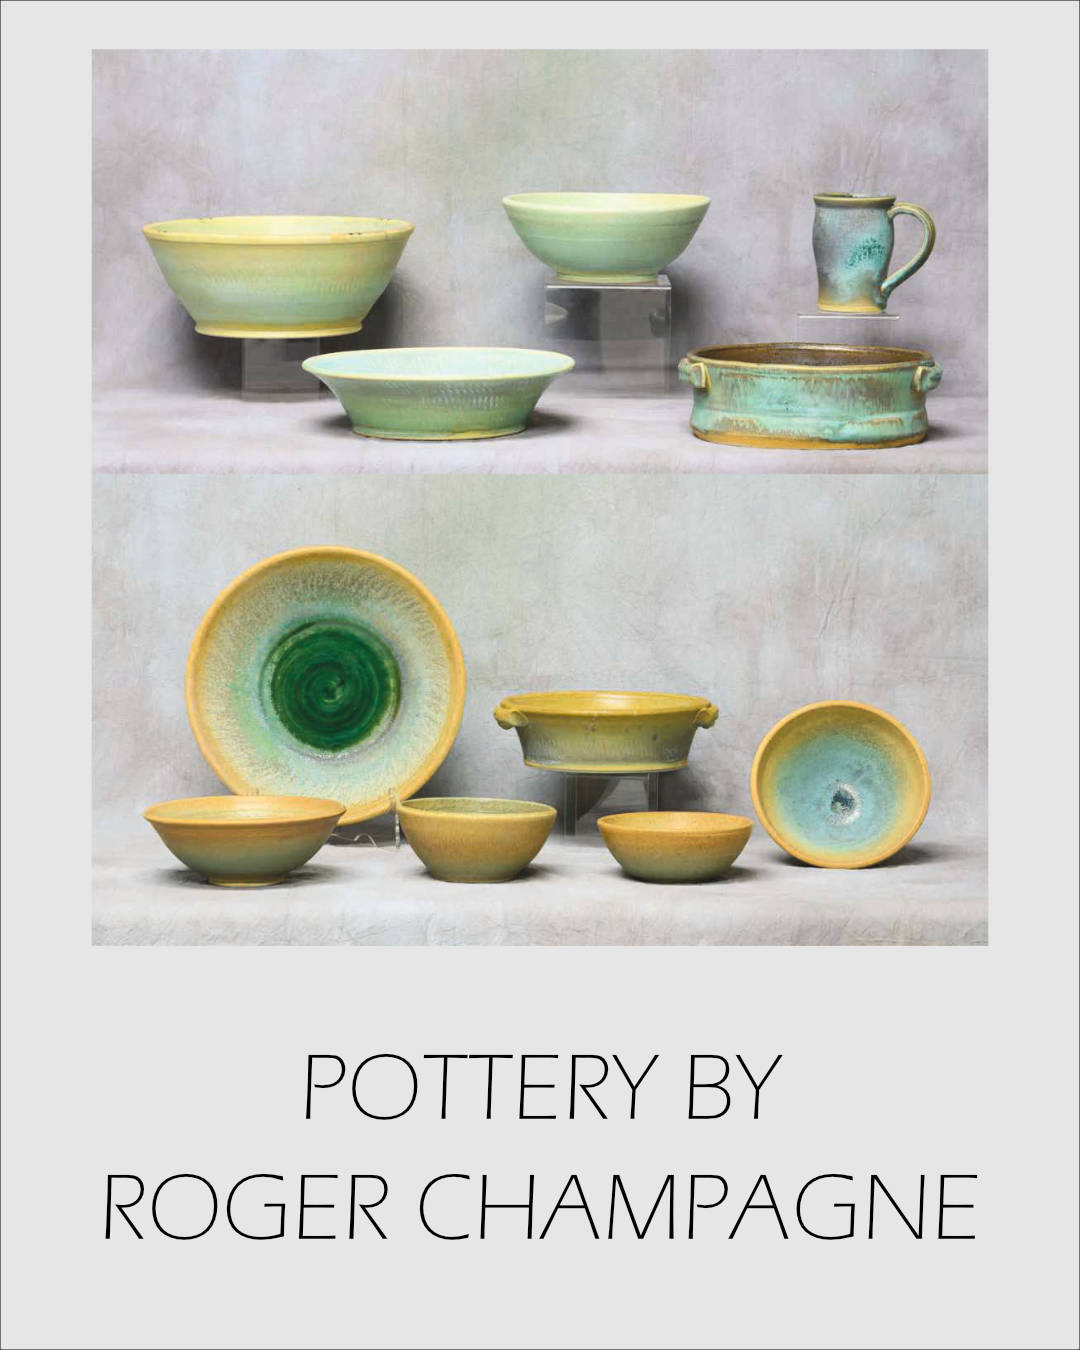 POTTERY BY roger